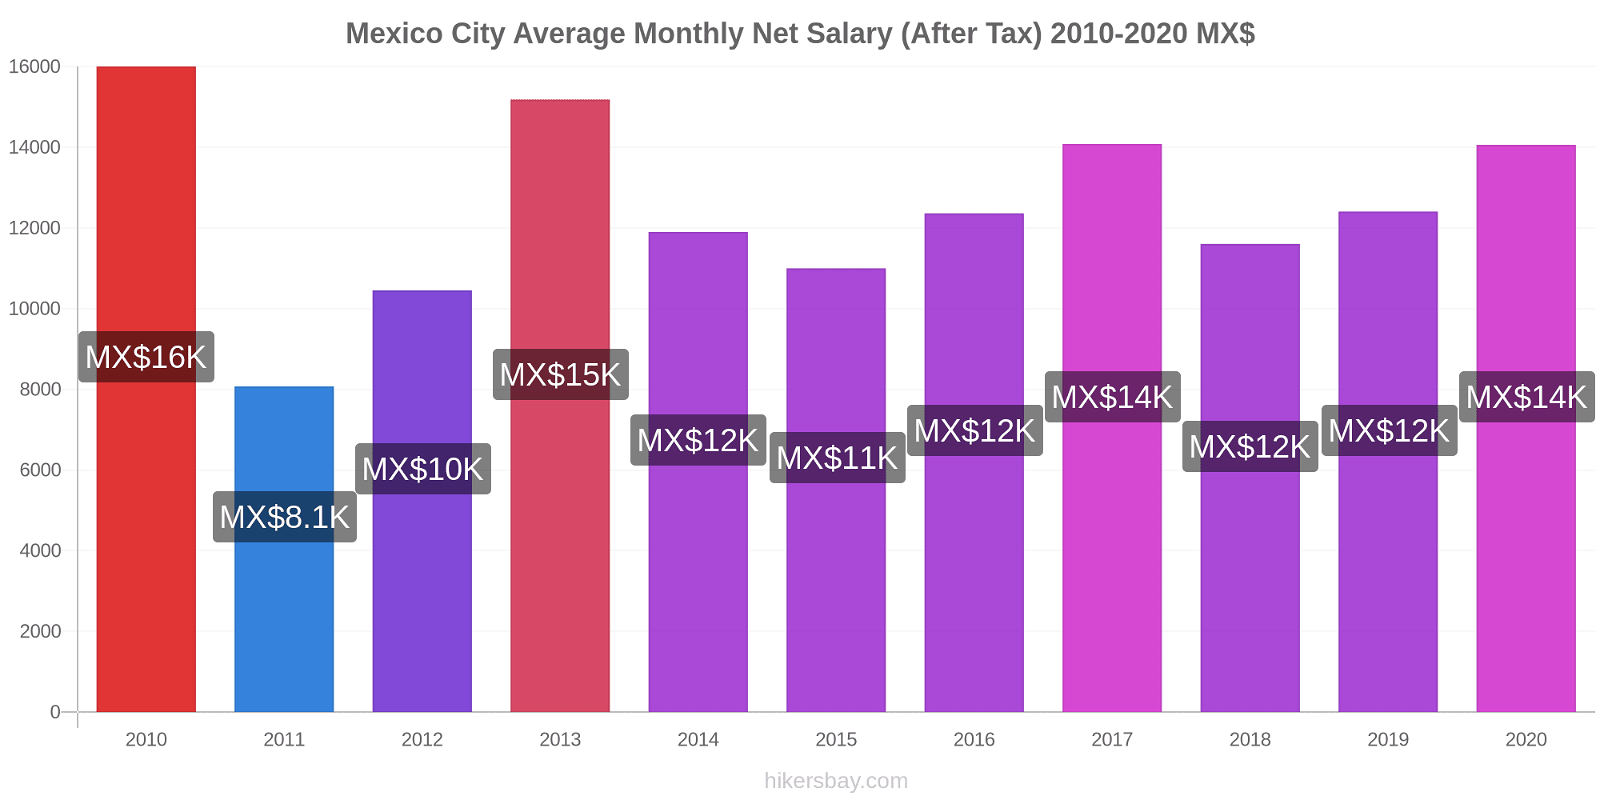 Mexico City price changes Average Monthly Net Salary (After Tax) hikersbay.com